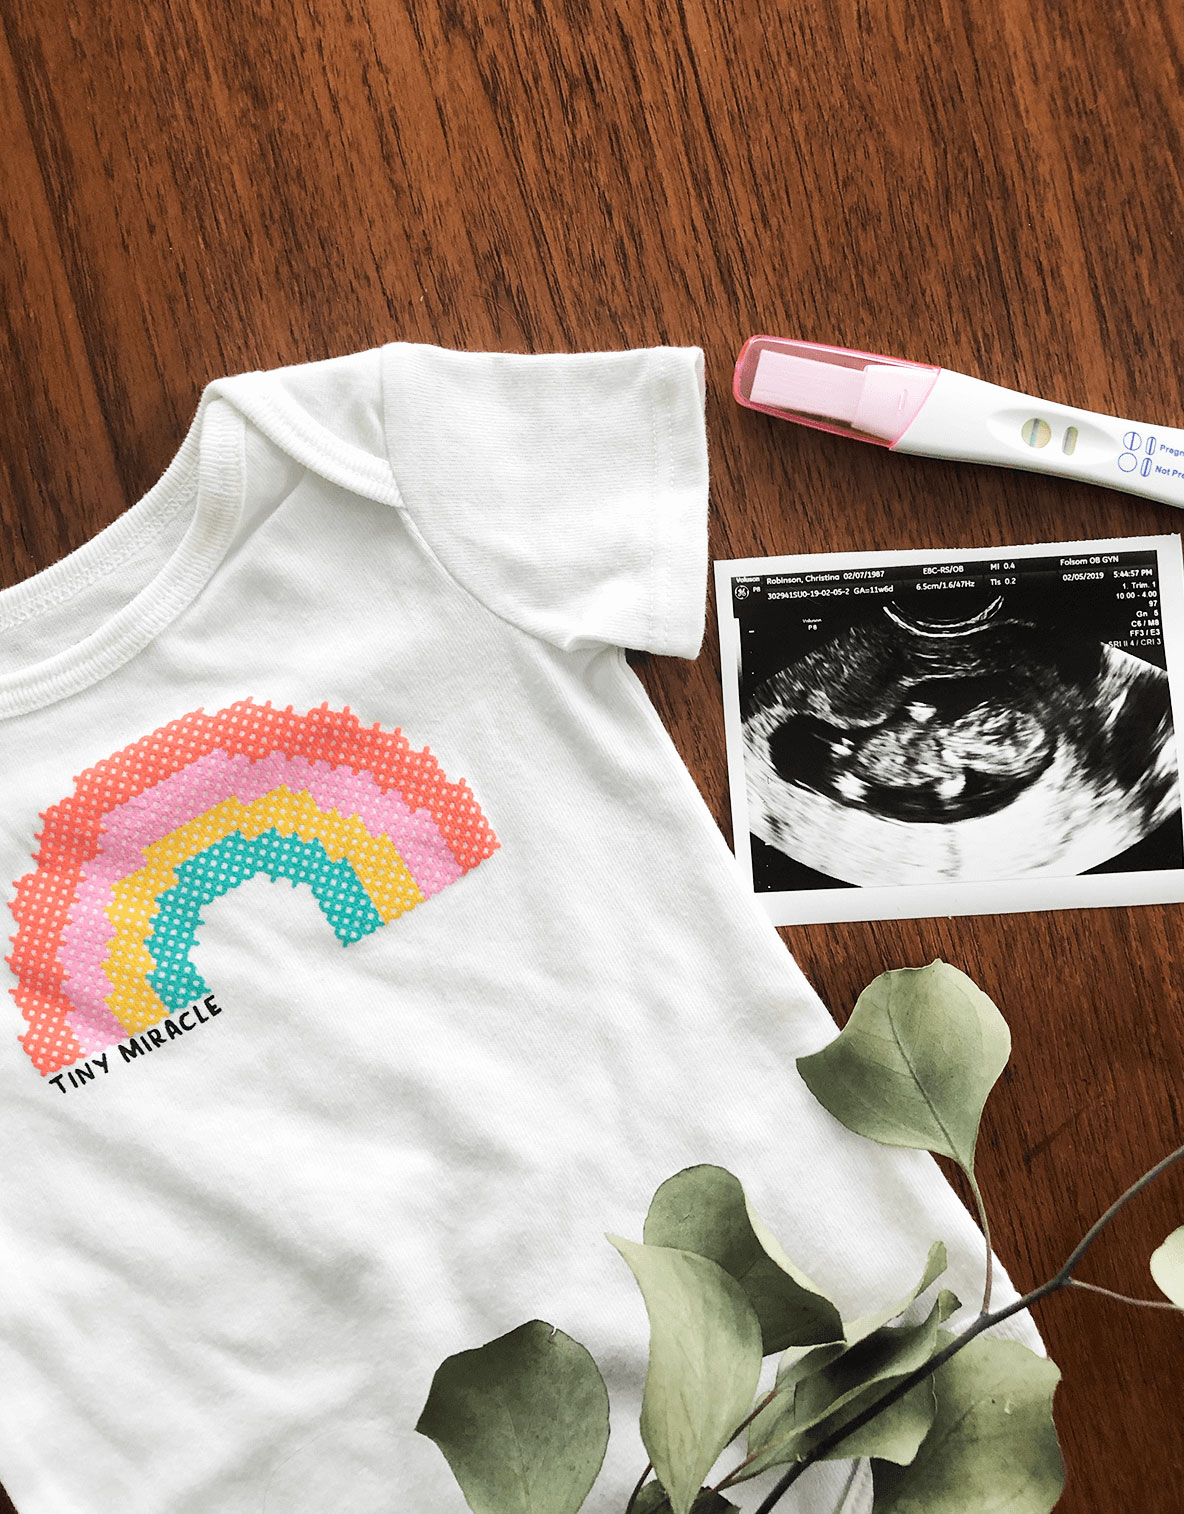 Pregnancy announcement from my first trimester